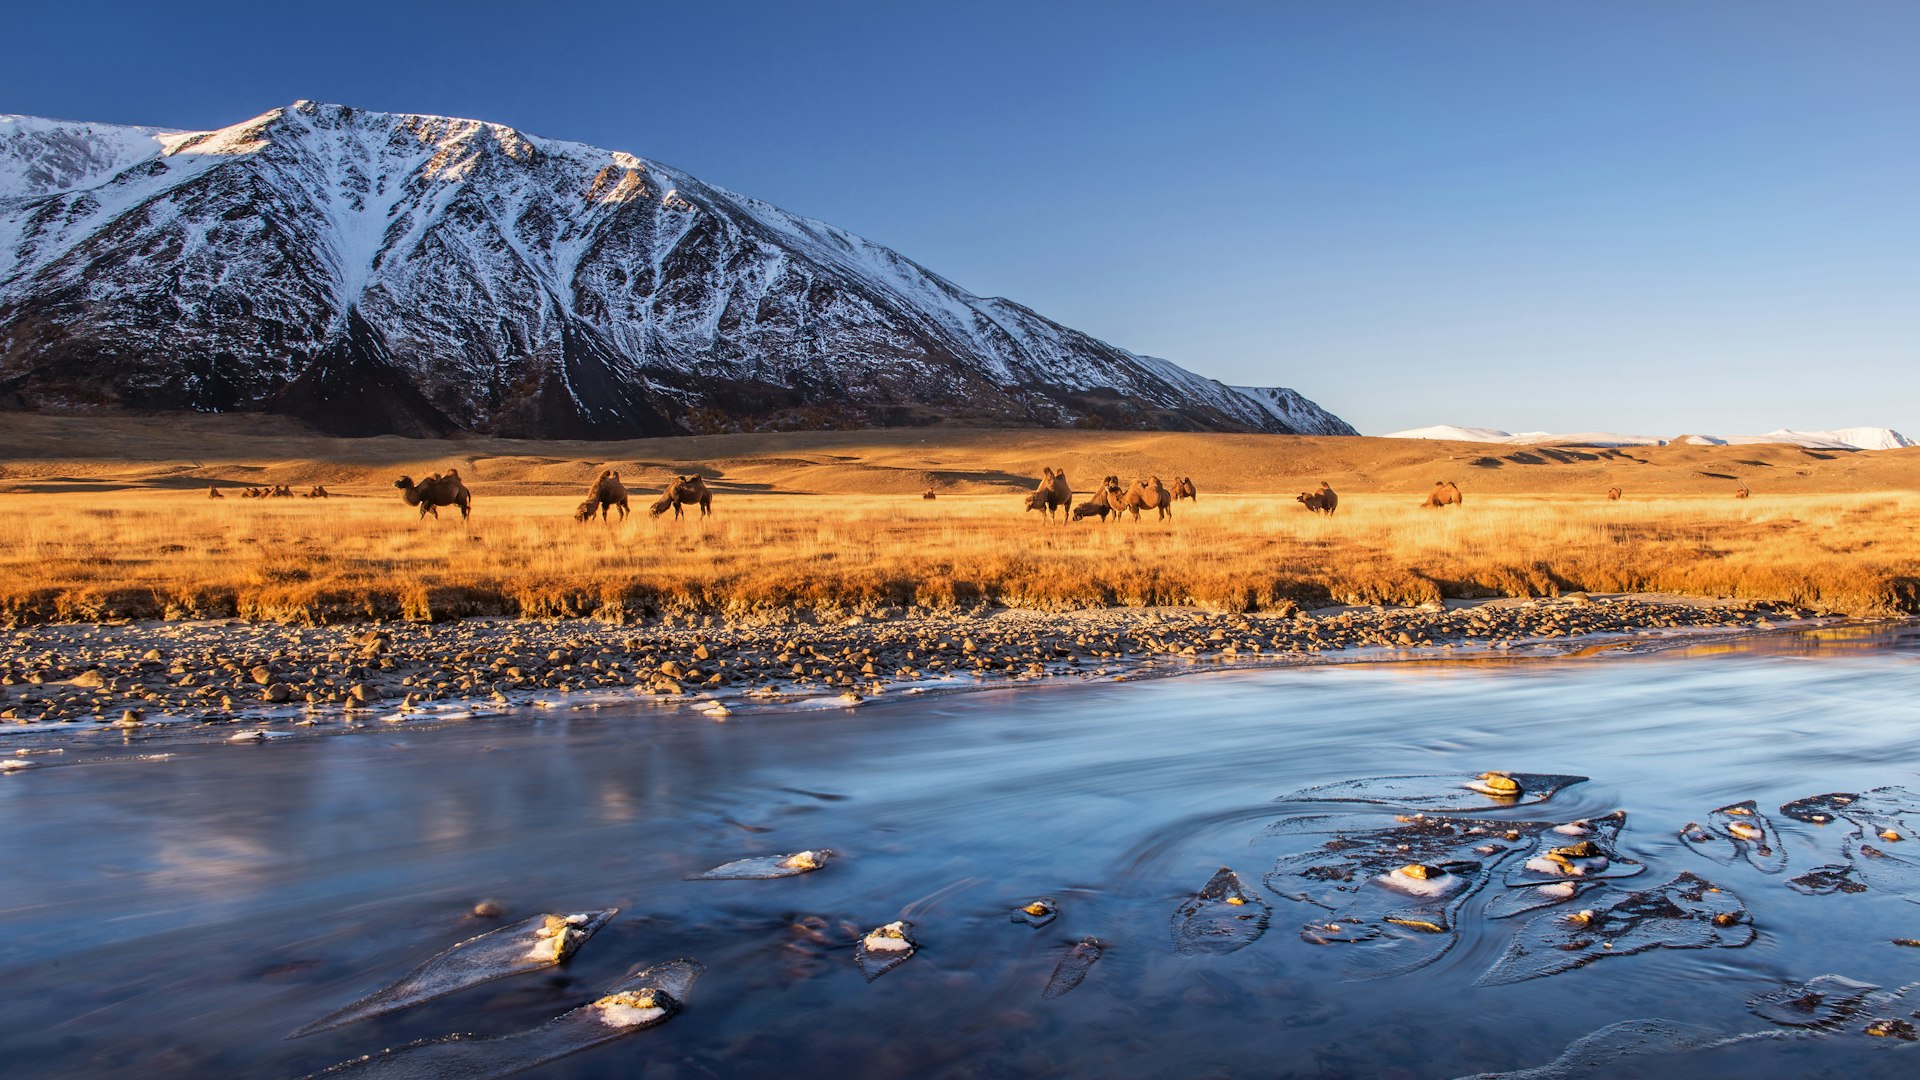 Camels stand between a flowing river and a series of snow-covered mountain peaks